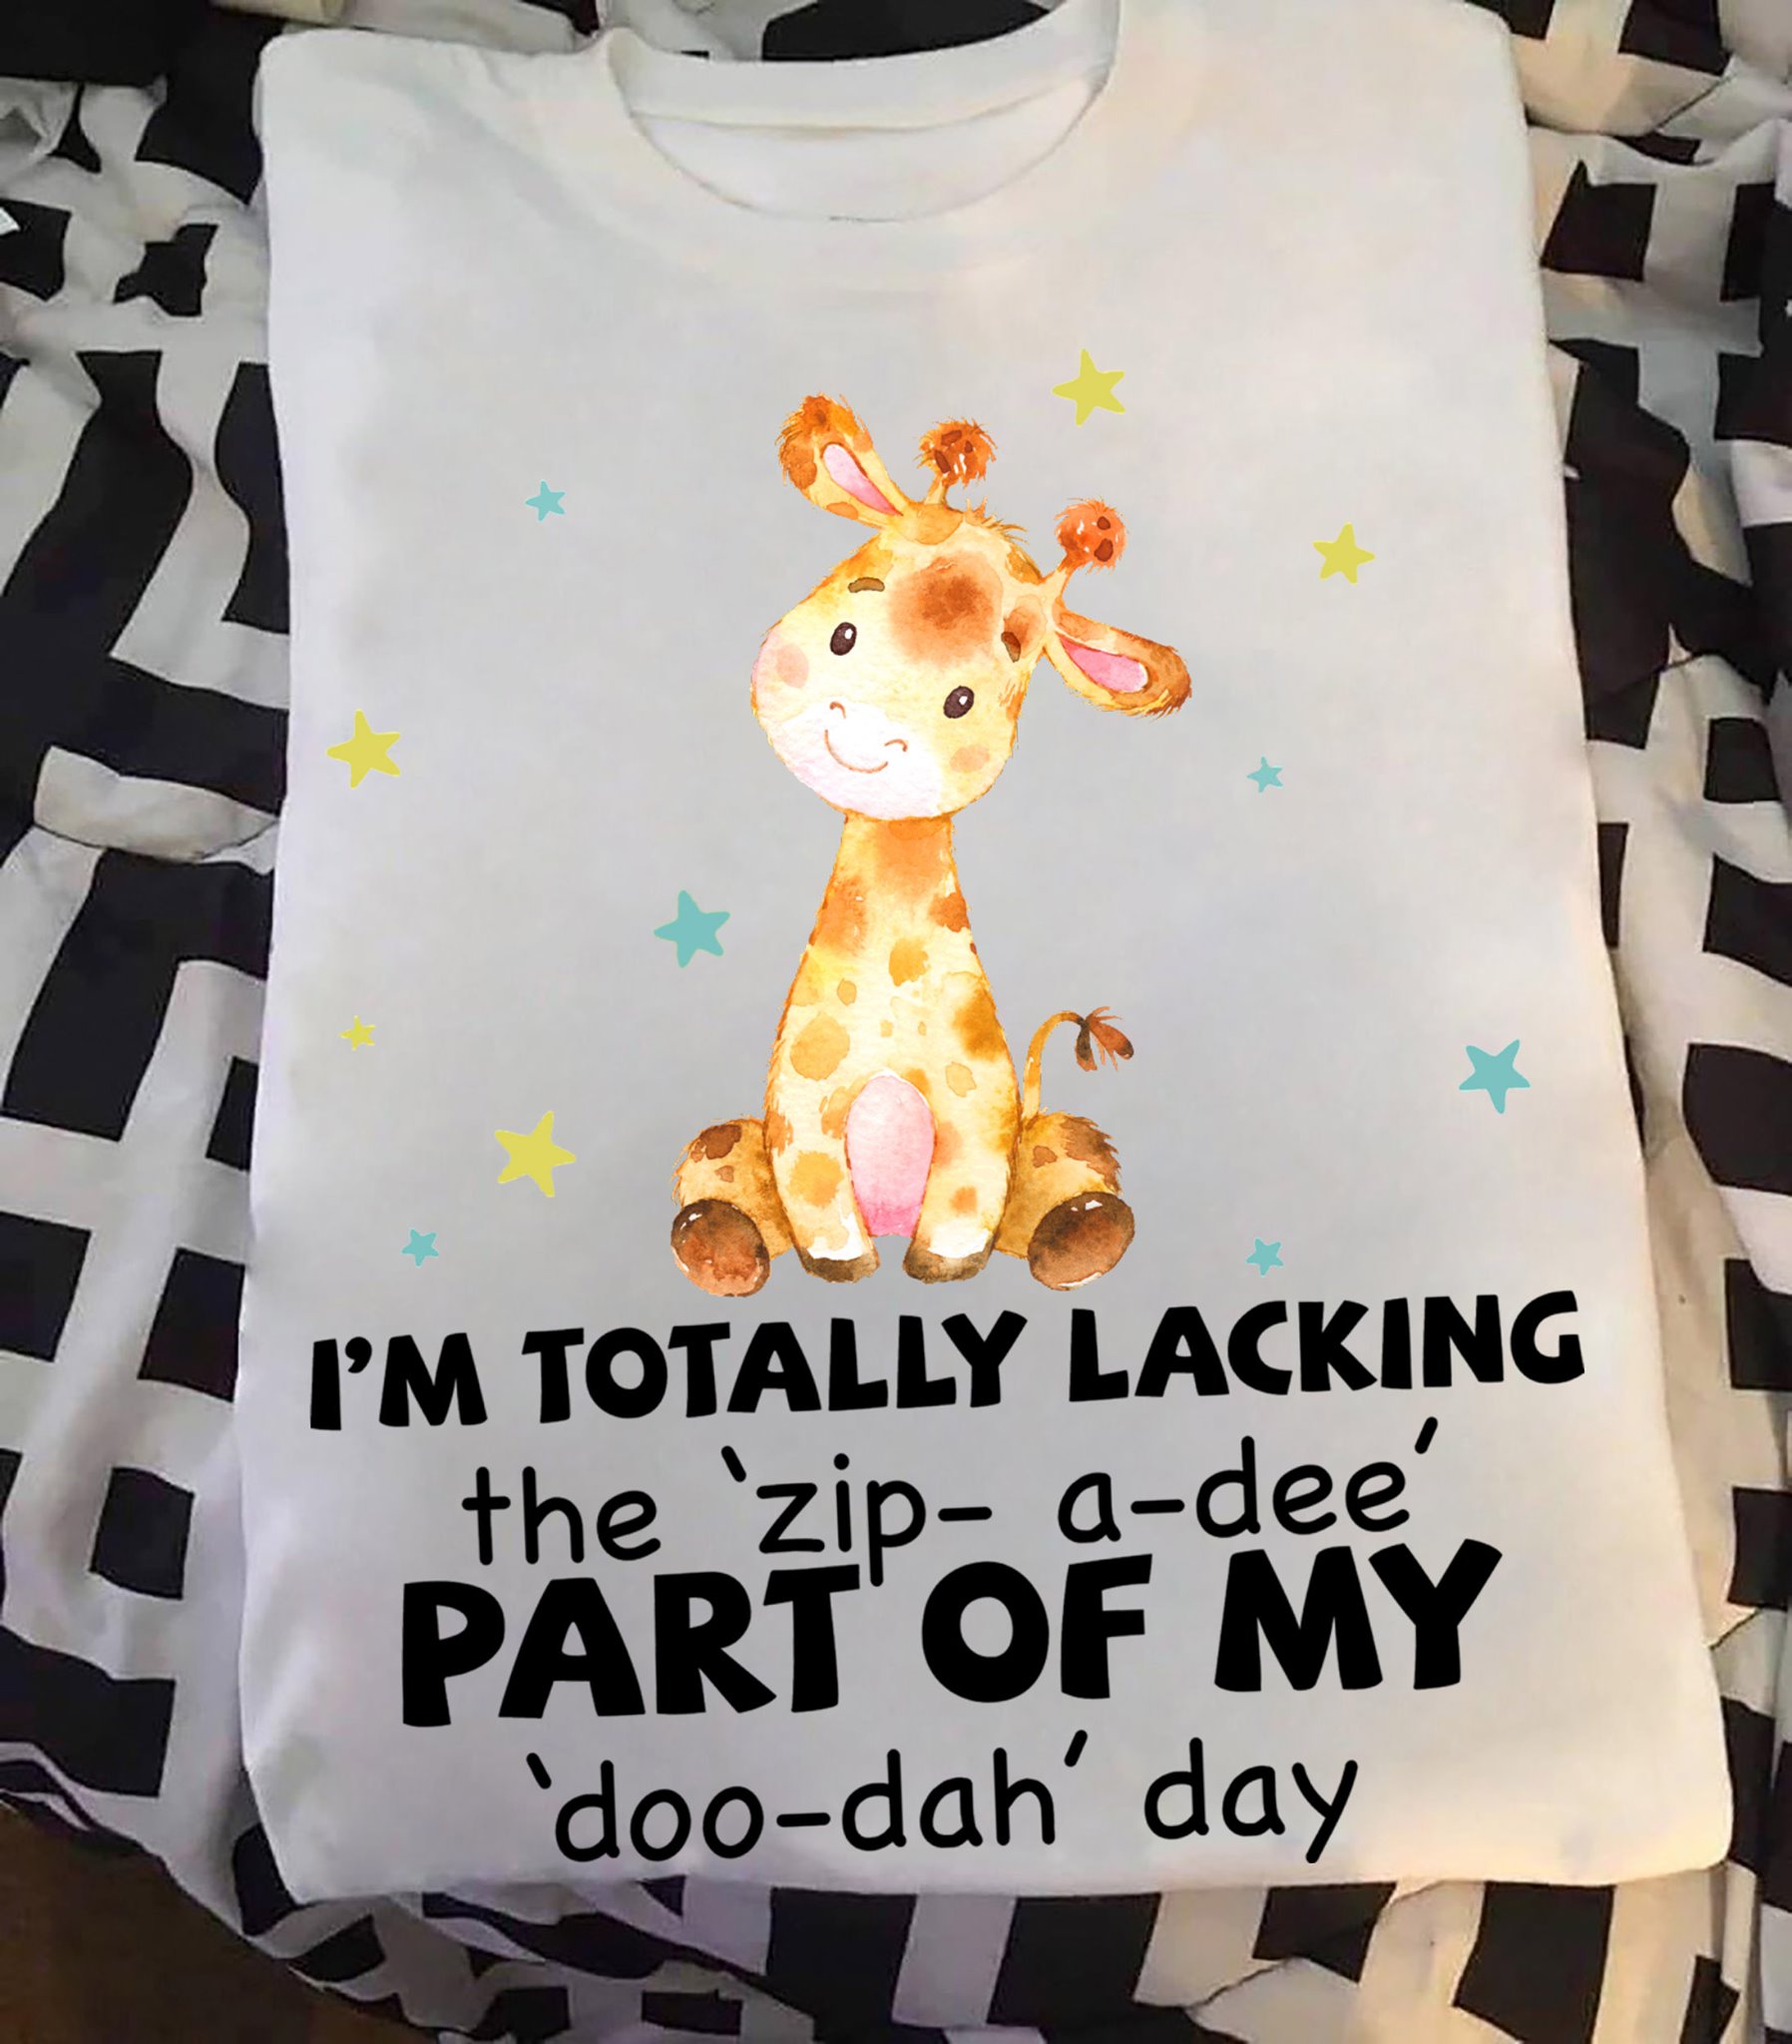 I'm totally lacking the zip-a-dee part of my doo-dah day - Giraffe lover